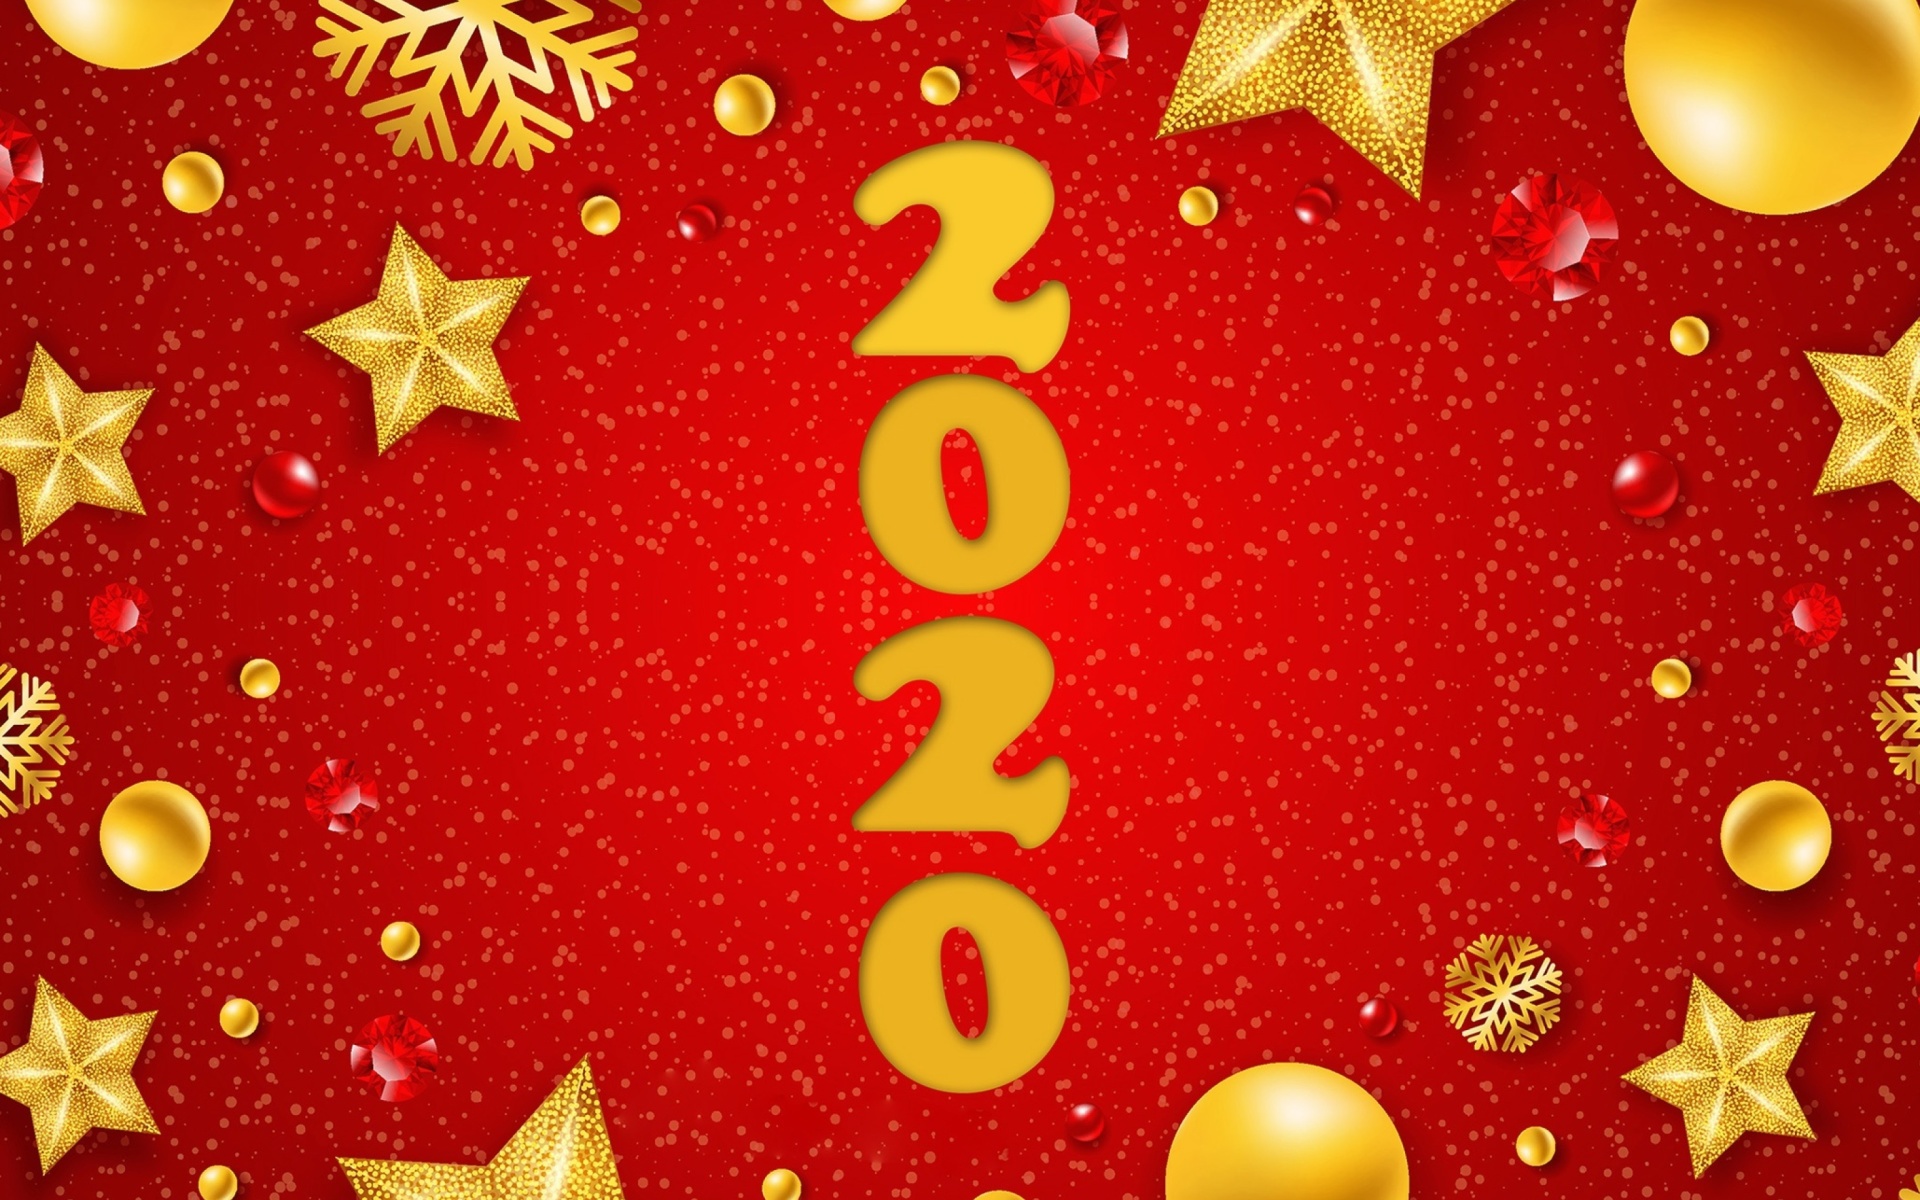 Happy New Year 2020 Messages screenshot #1 1920x1200